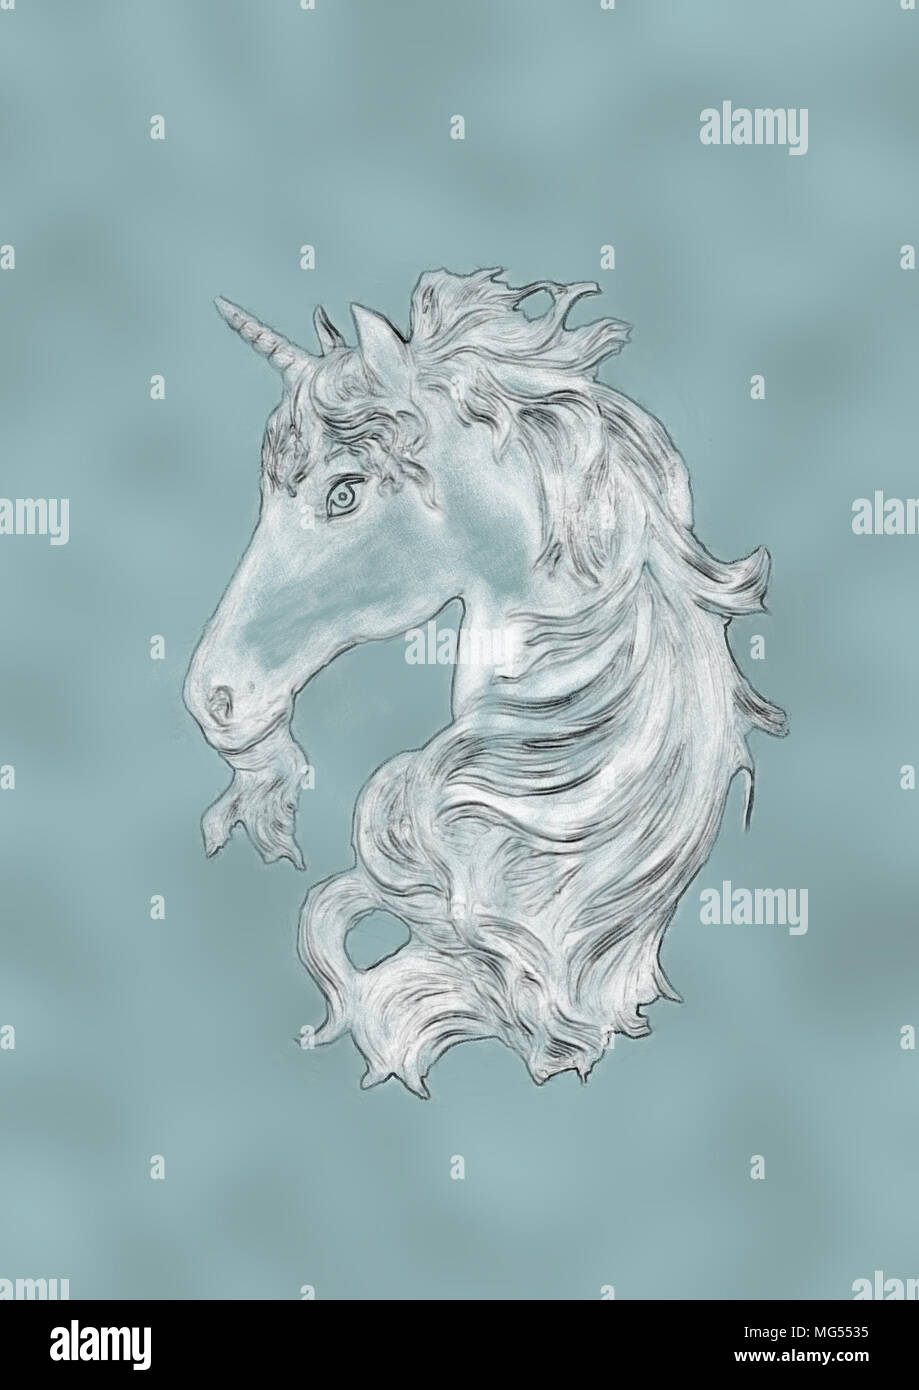 124 Unicorn Drawing Photos, Pictures And Background Images For Free  Download - Pngtree